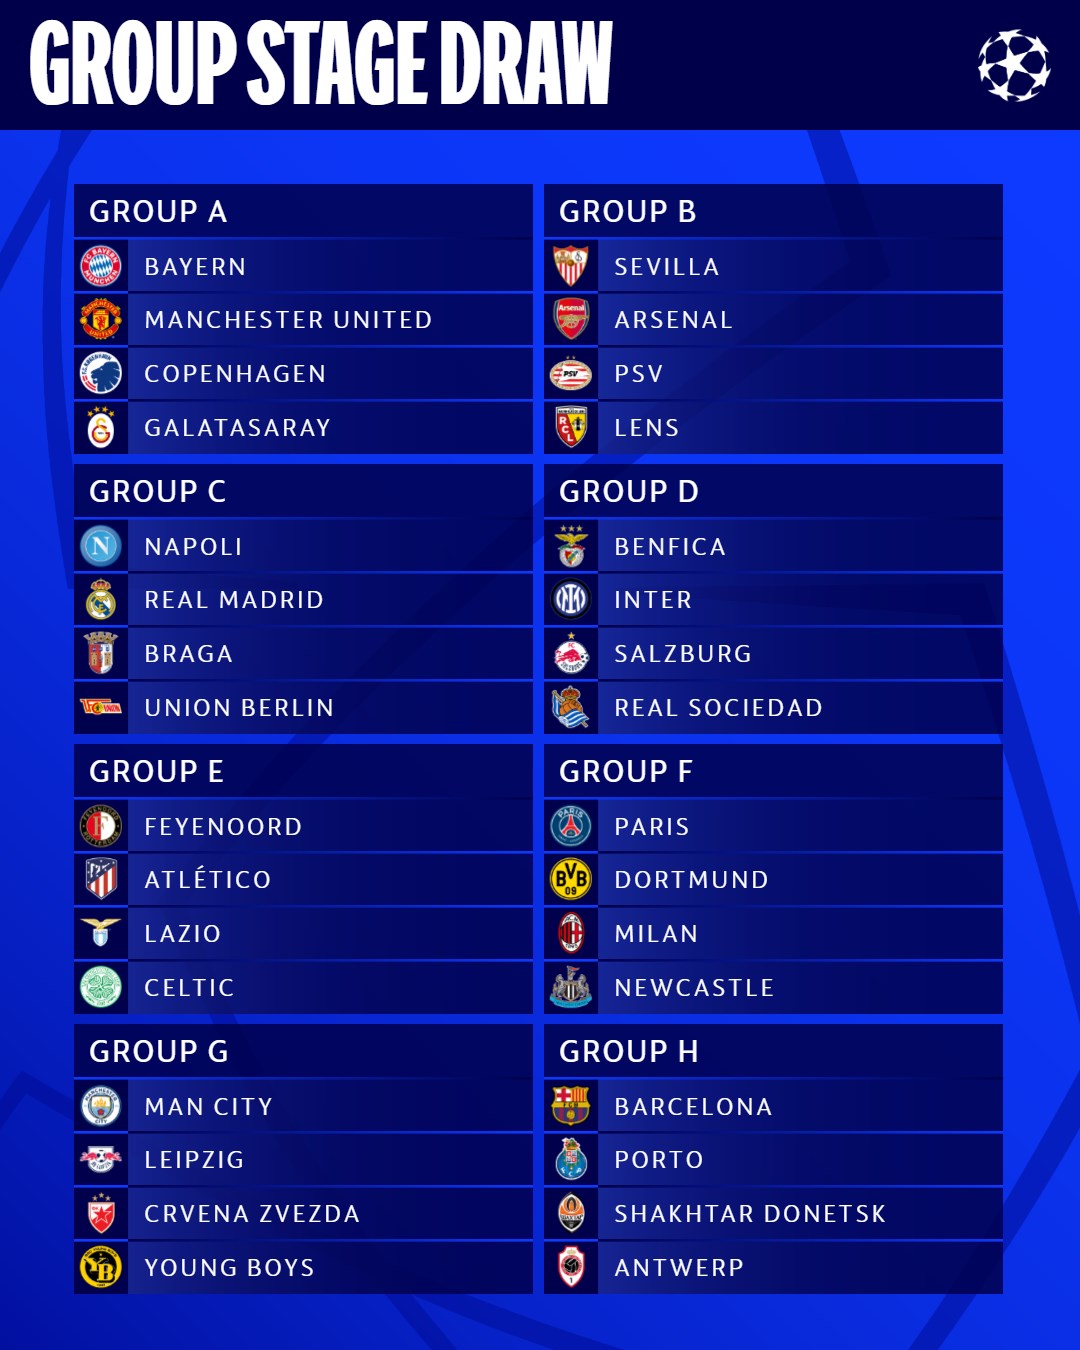 UEFA Champions League draw: when and where to watch it in India? - The Hindu